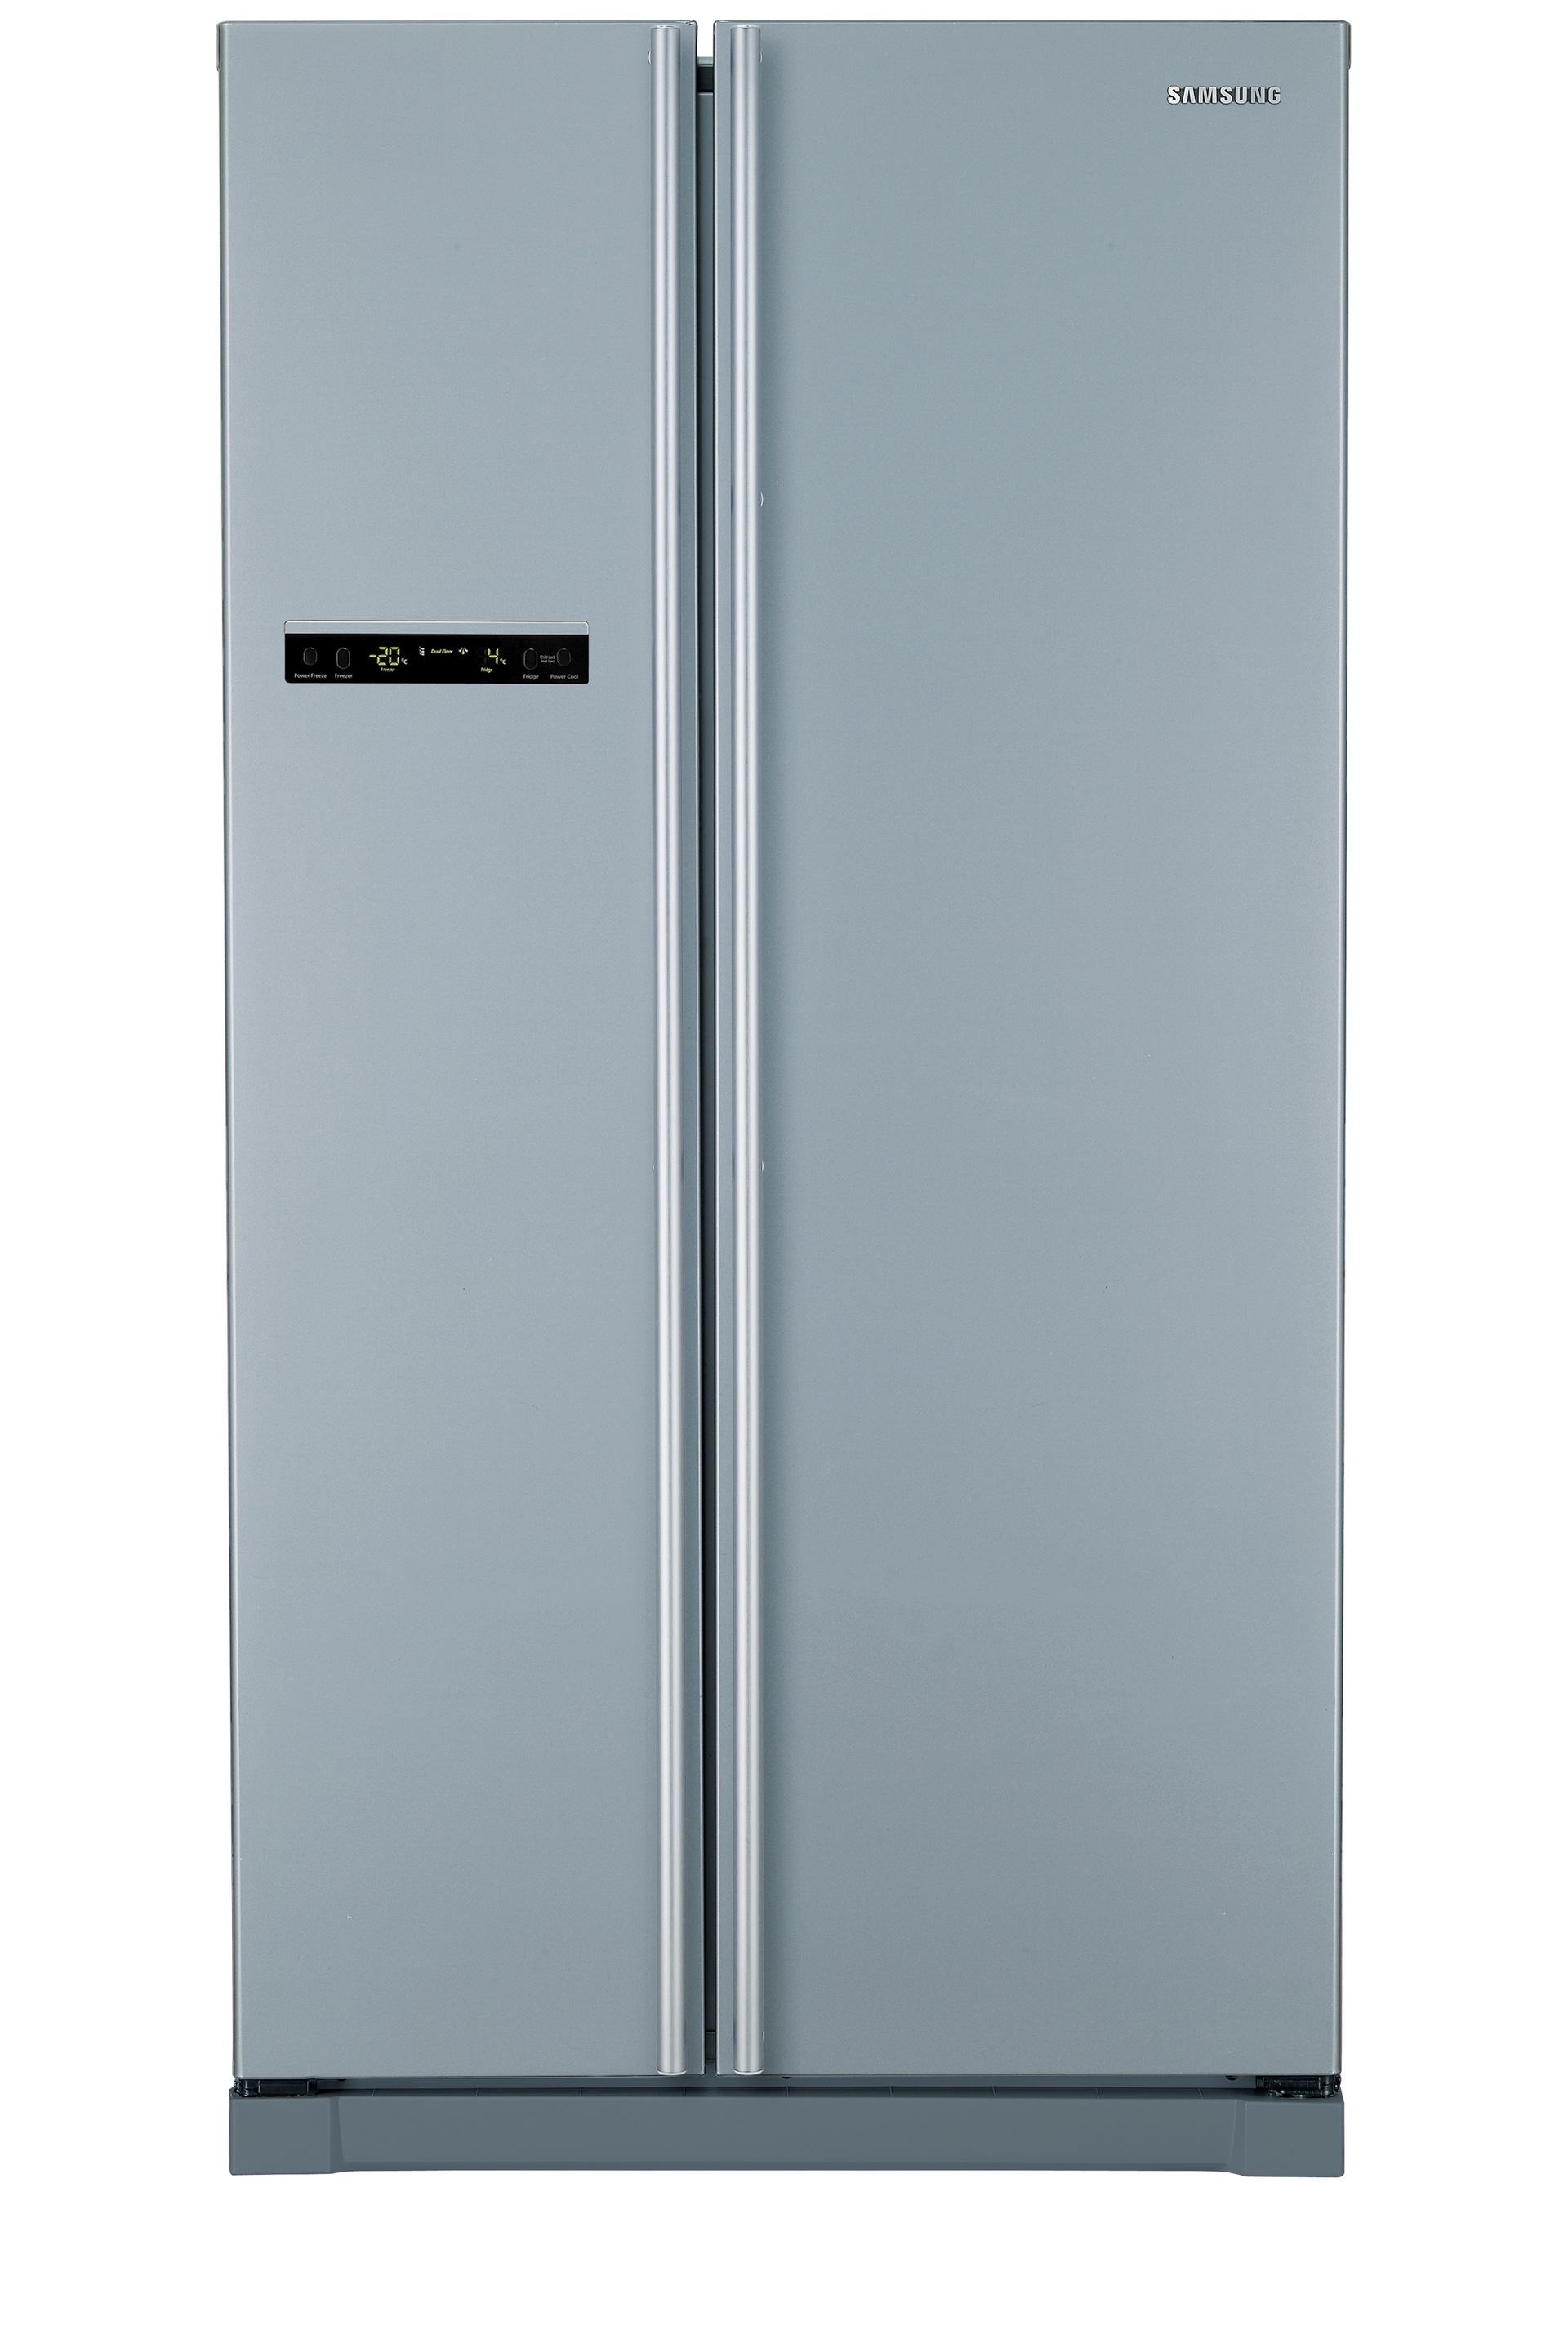 Side by side refrigerator dimensions samsung note